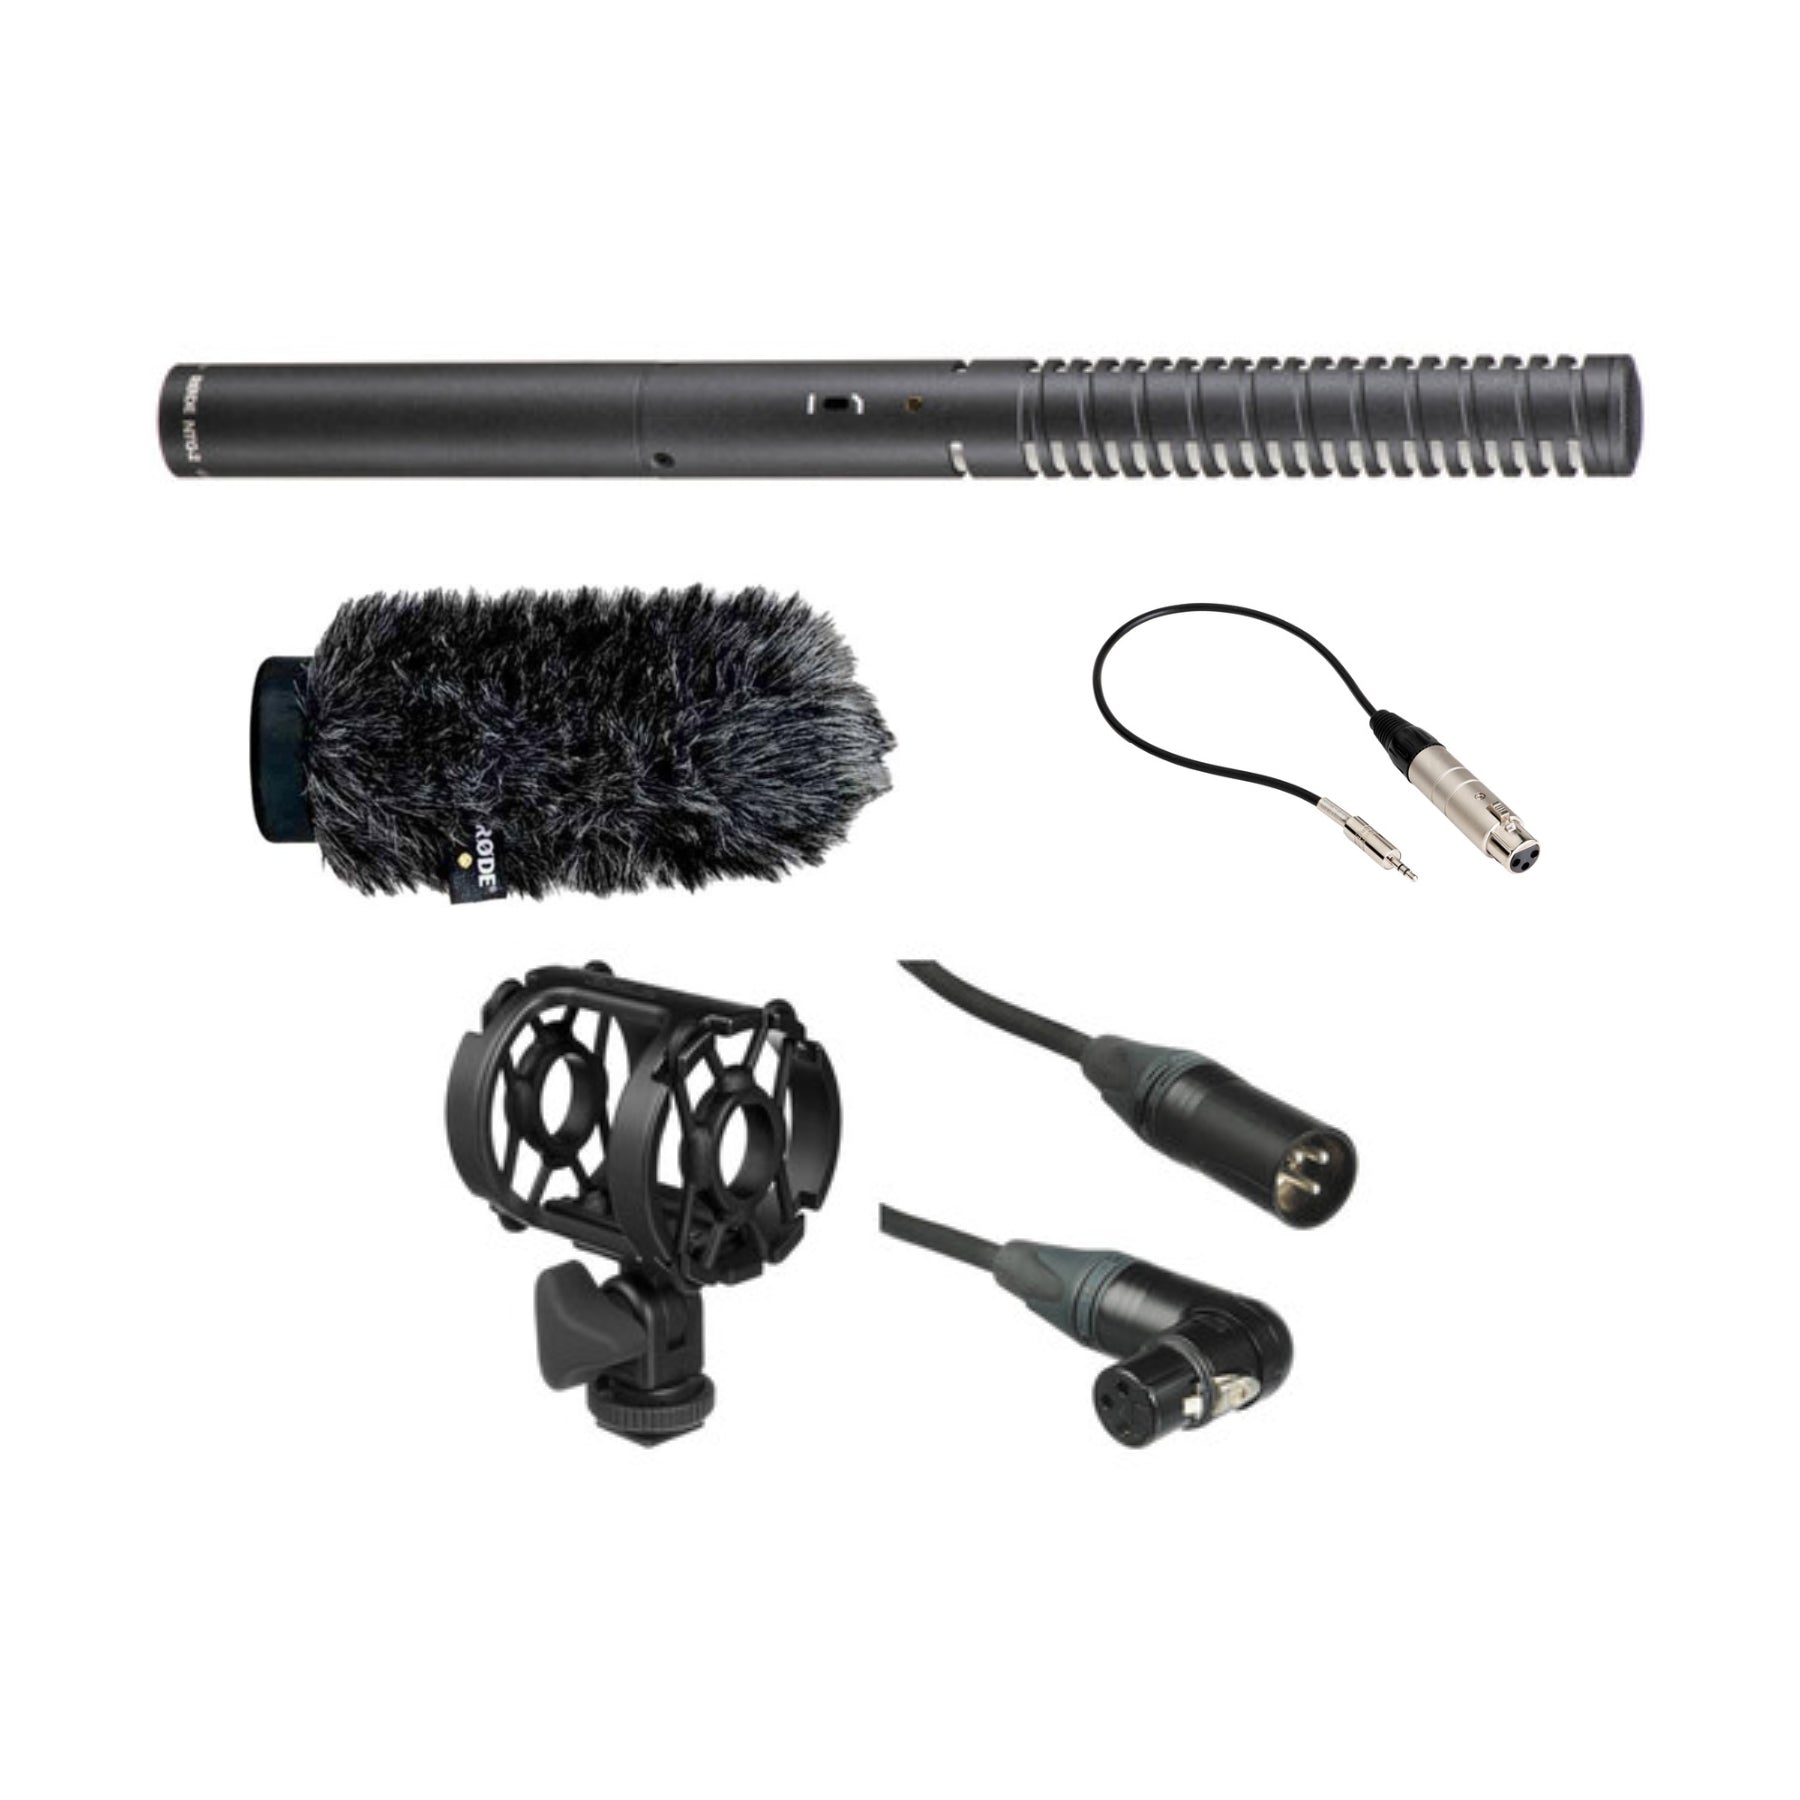 Rode NTG 2 Microphone for hire